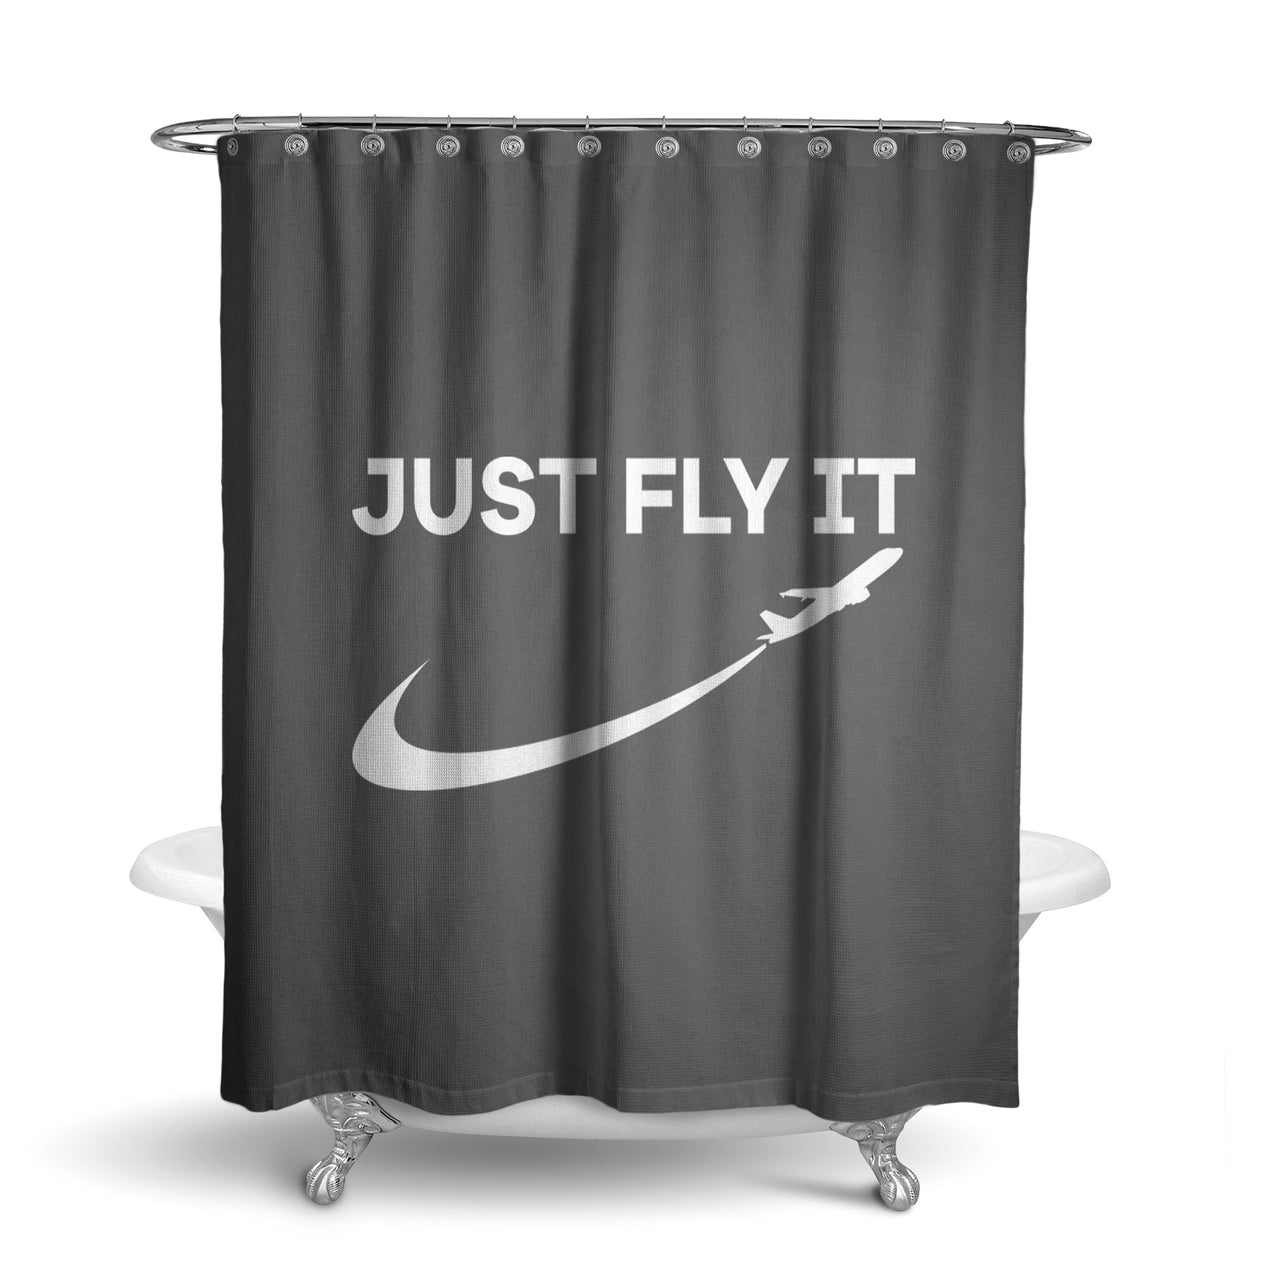 Just Fly It 2 Designed Shower Curtains